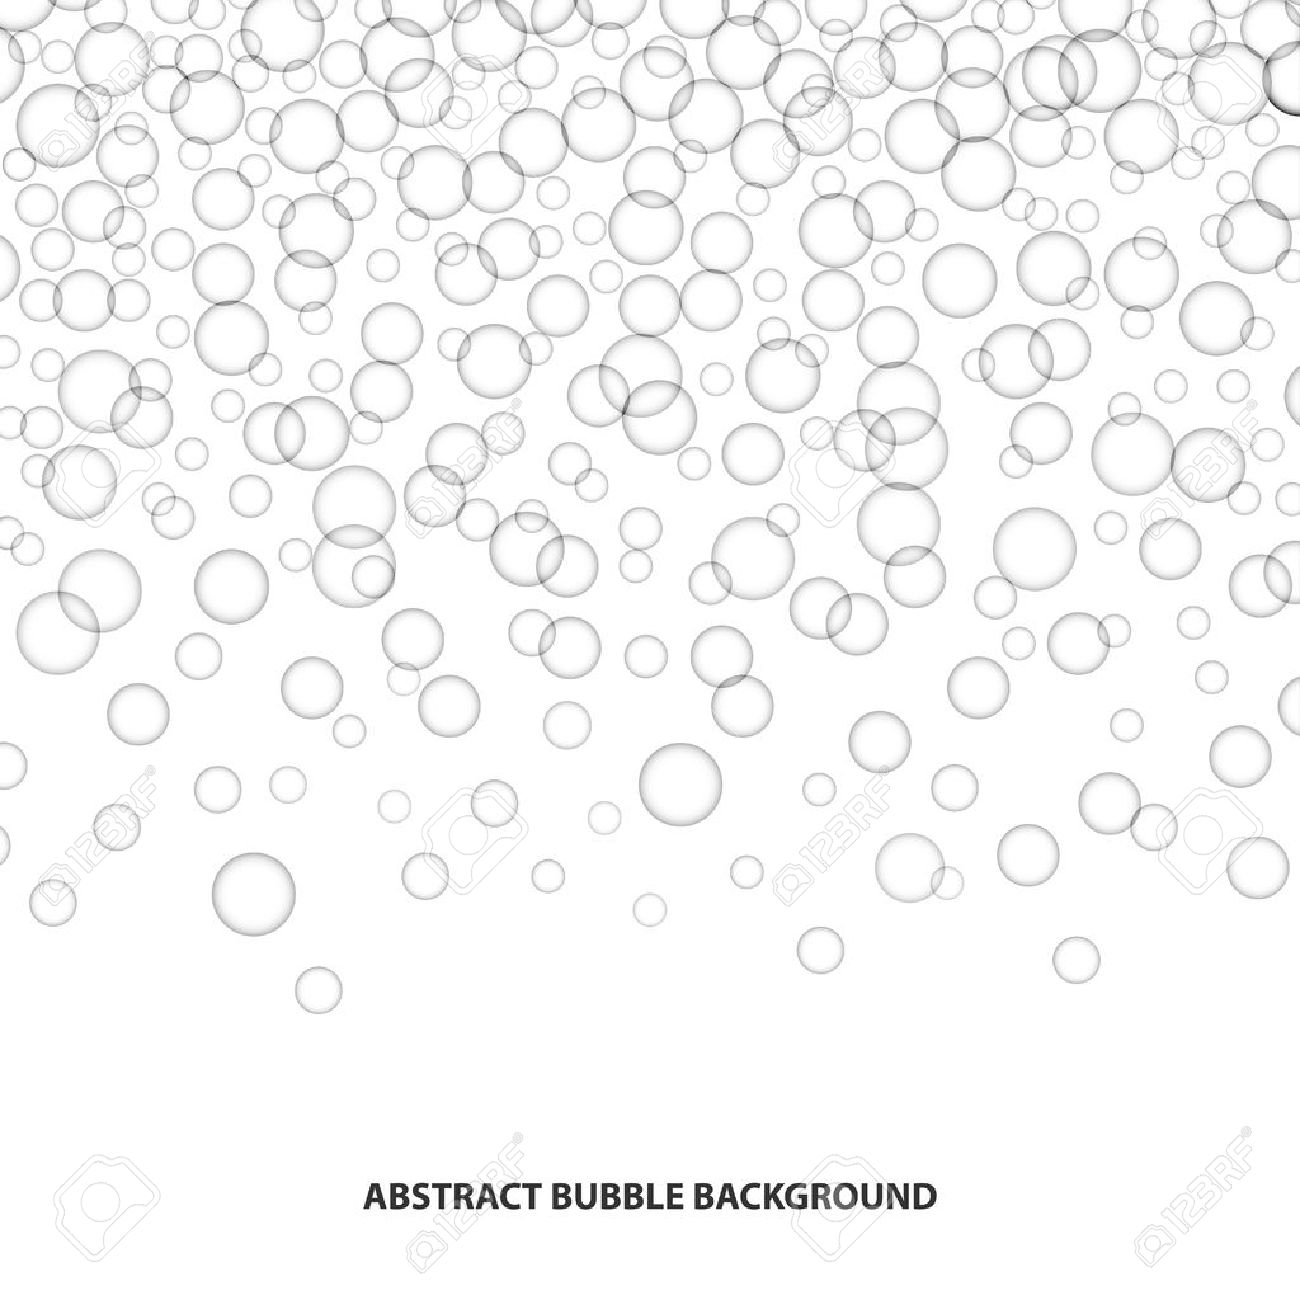 Abstract Bubble Background Transparent Bubbles On A White